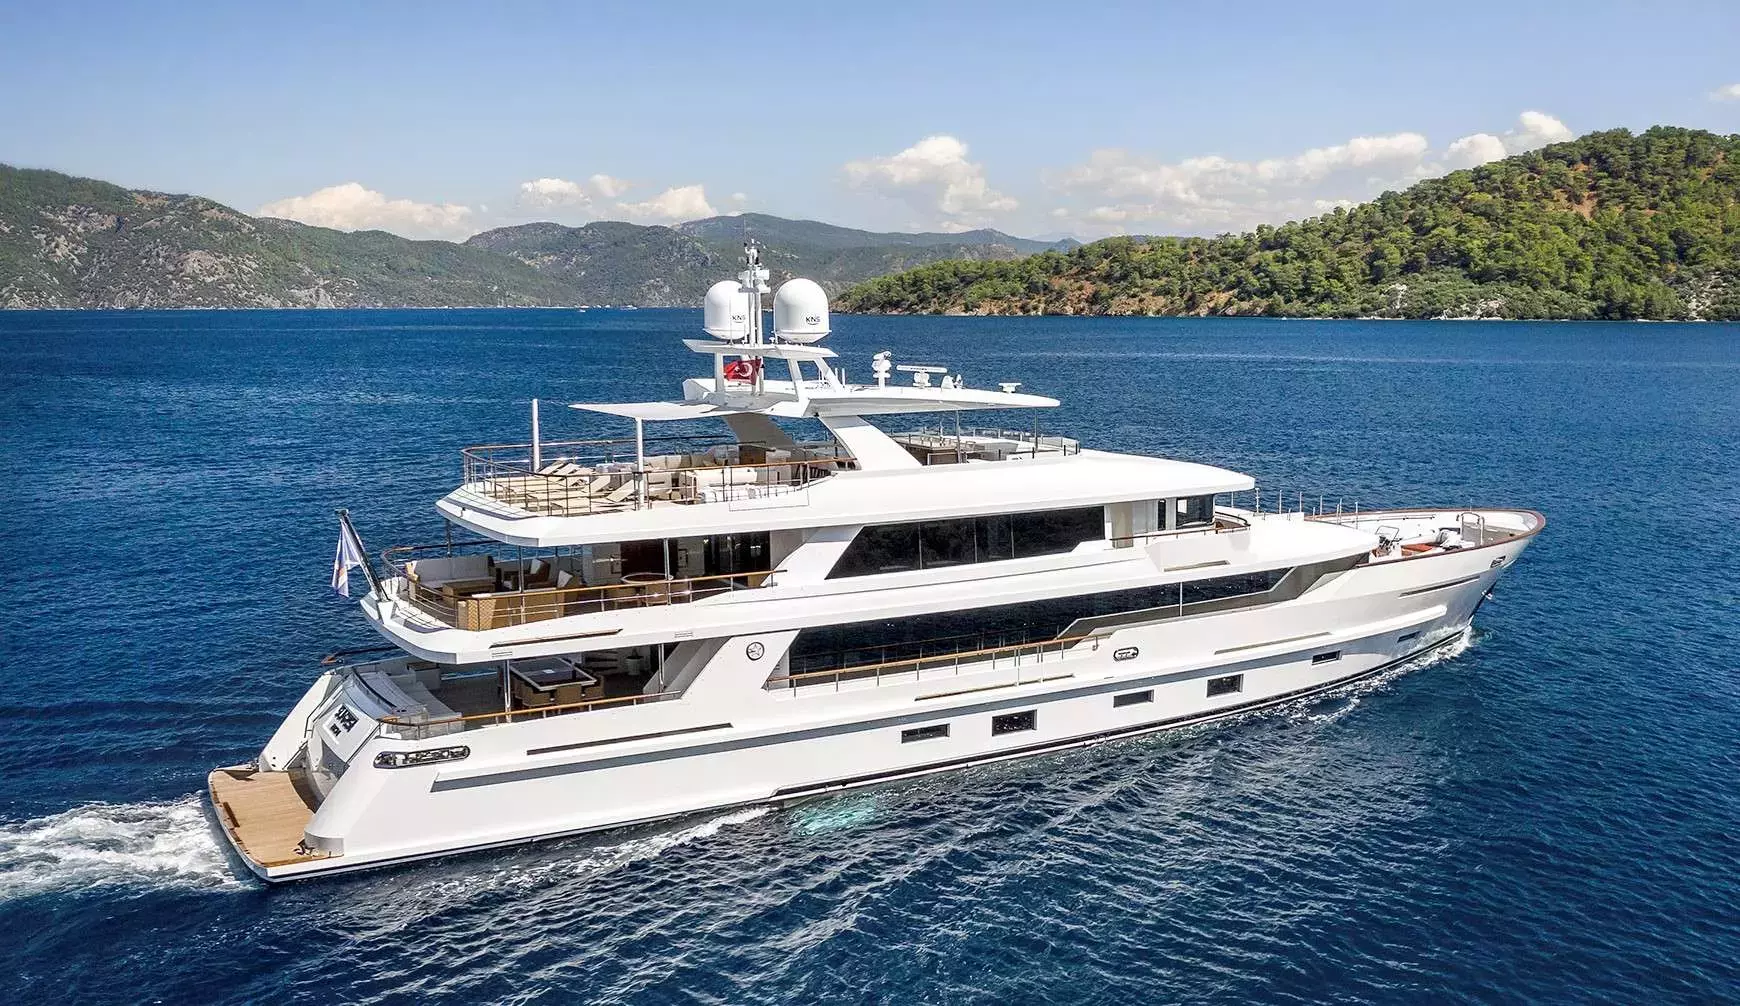 Sunrise by Custom Made - Top rates for a Charter of a private Superyacht in Turkey